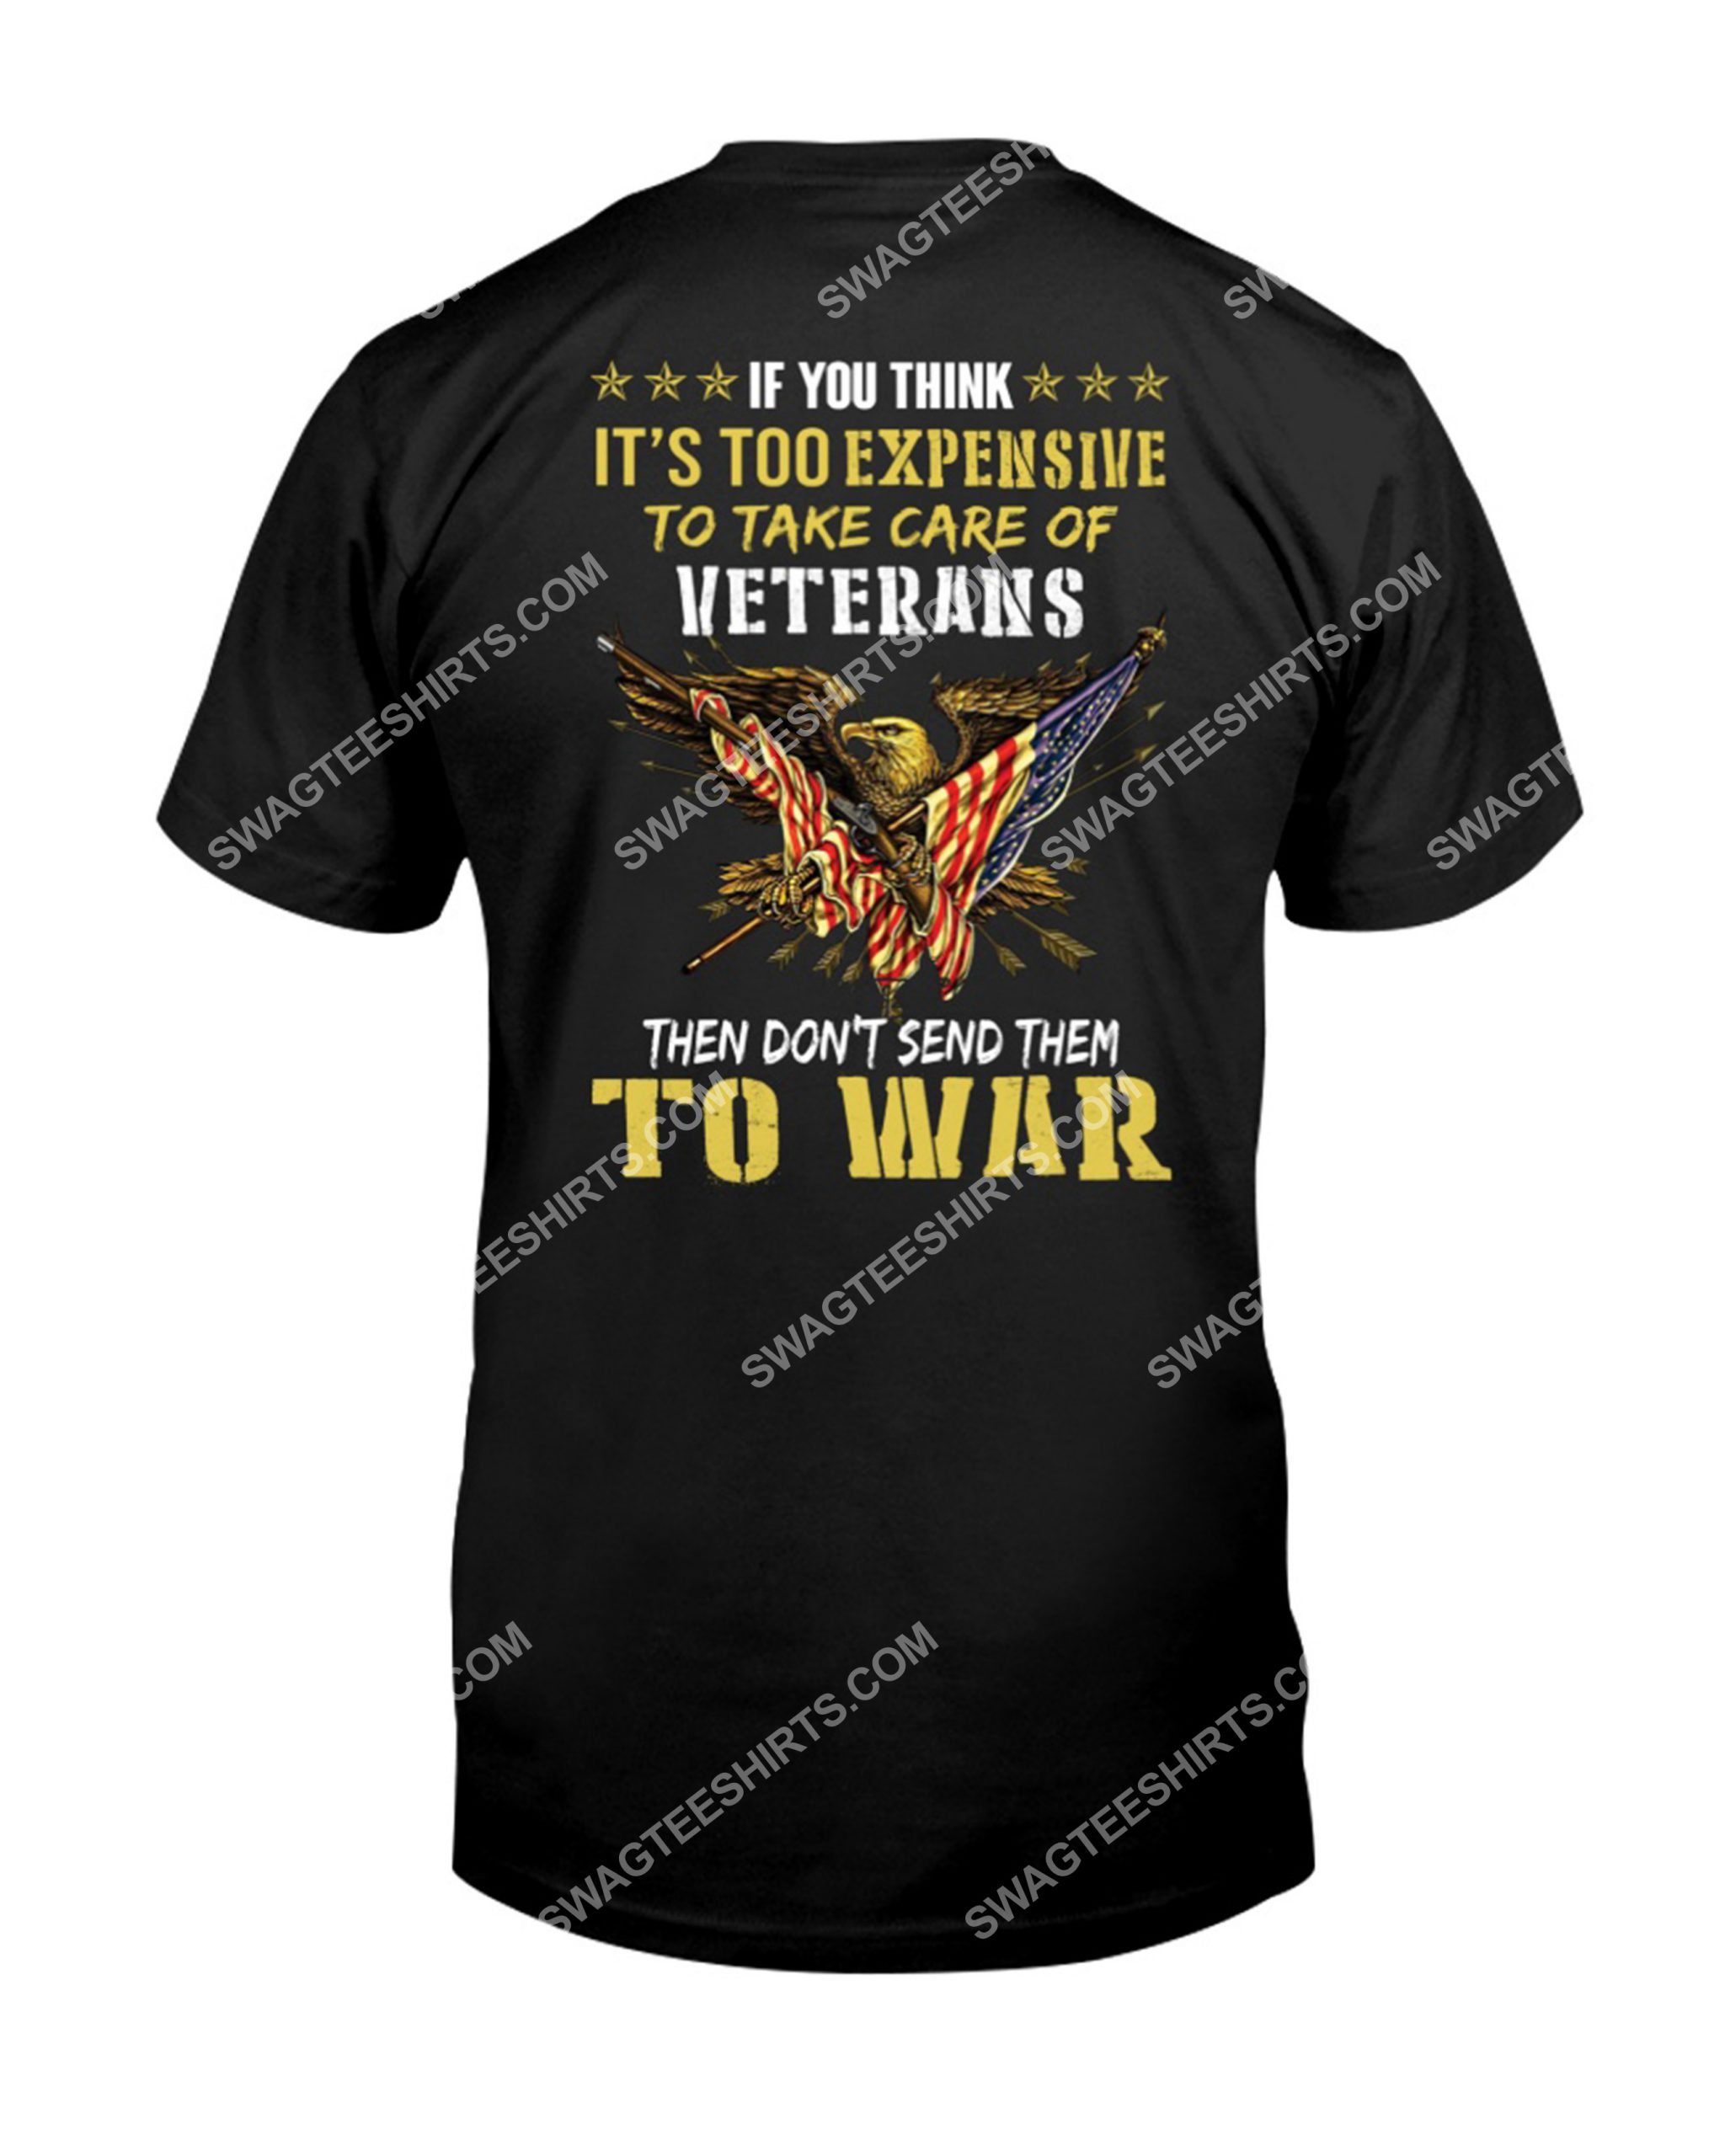 if you think it's too expensive to take of veterans then don't send them to war shirt 1(1)